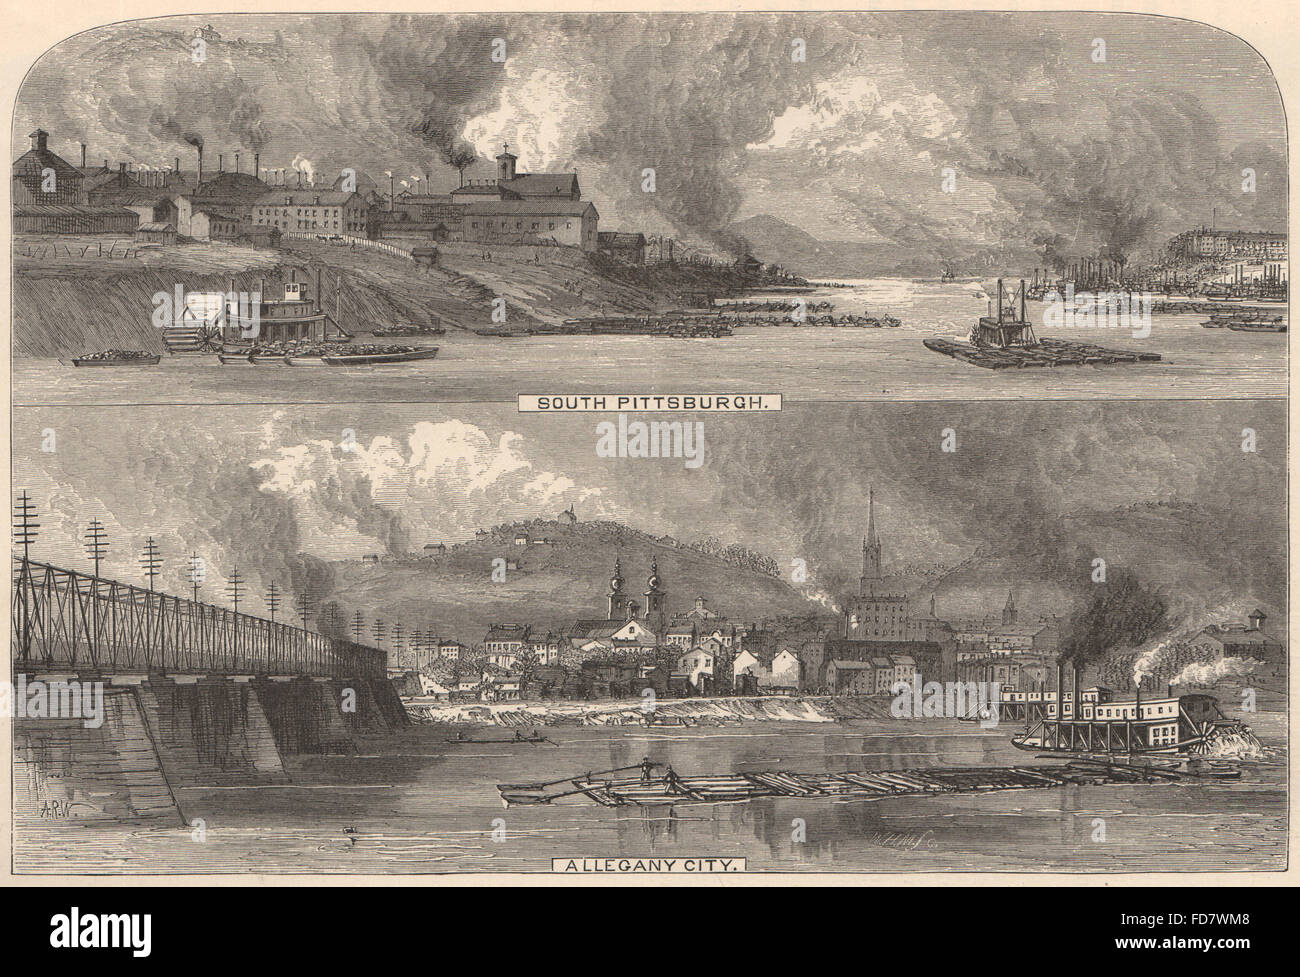 SOUTH PITTSBURG ET ALLEGHENY CITY : Vues. New York, antique print 1874 Banque D'Images